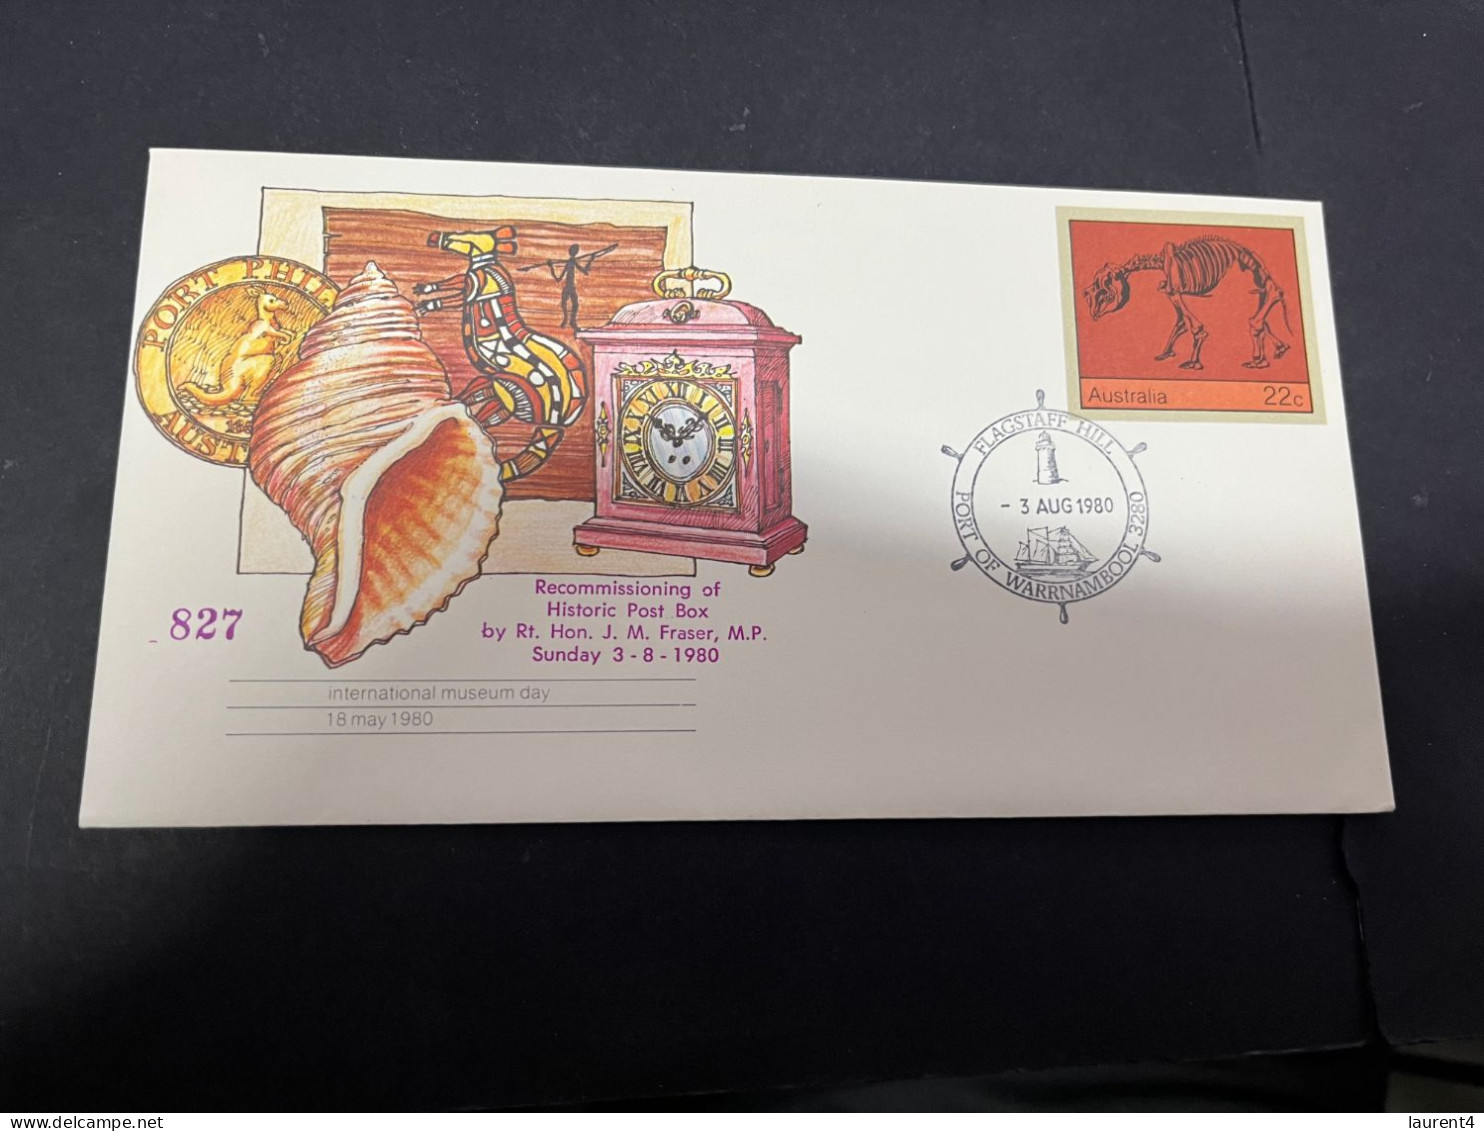 17-4-2024 (2 X 19) Australia - 1980 - Seashell Cover - With Lighthouse Postmark - Premiers Jours (FDC)